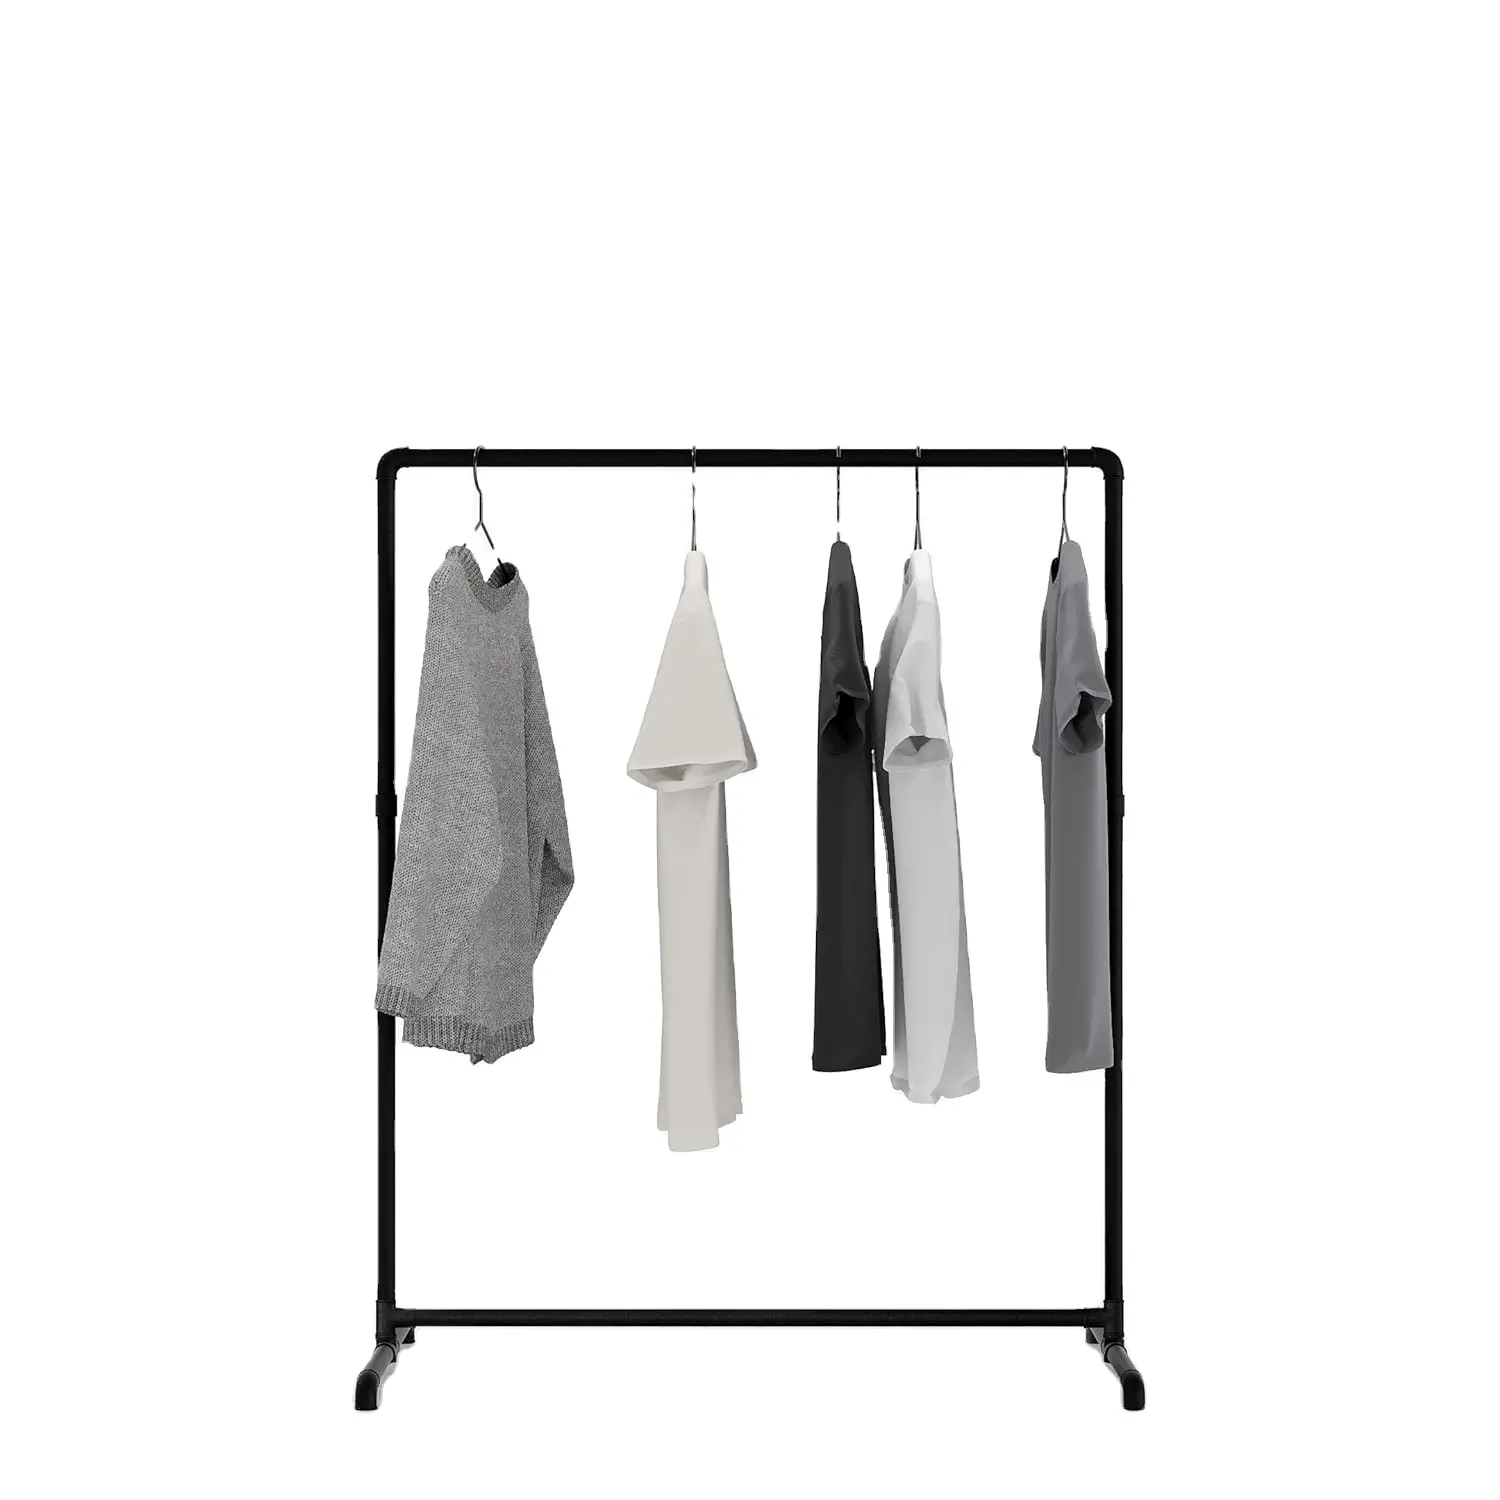 Industrial Design garment rack freestanding Coat Rack for Wardrobe Wall Clothes Rack Made of Sturdy Pipes from Water Pipes